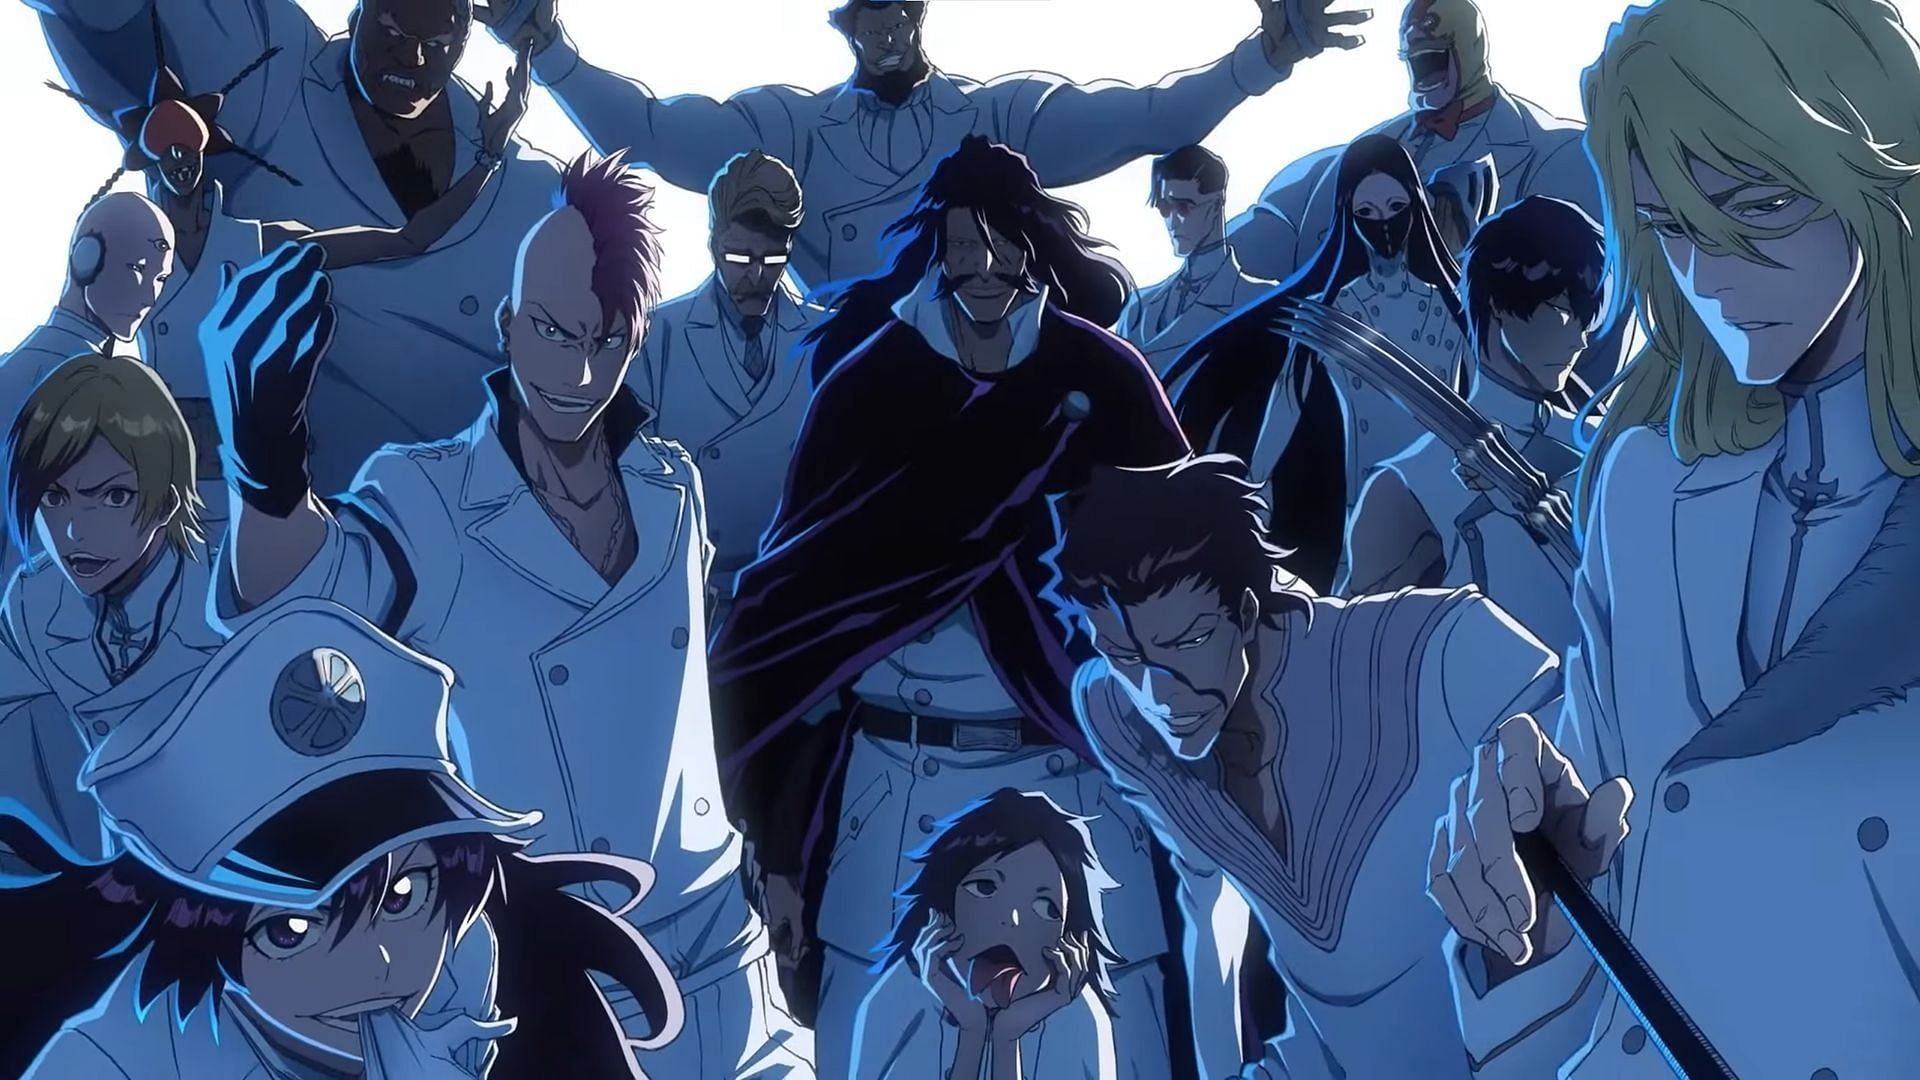 The Sternritter are once again thrust into the spotlight in the latest Bleach: TYBW trailer (Image via Studio Pierrot)